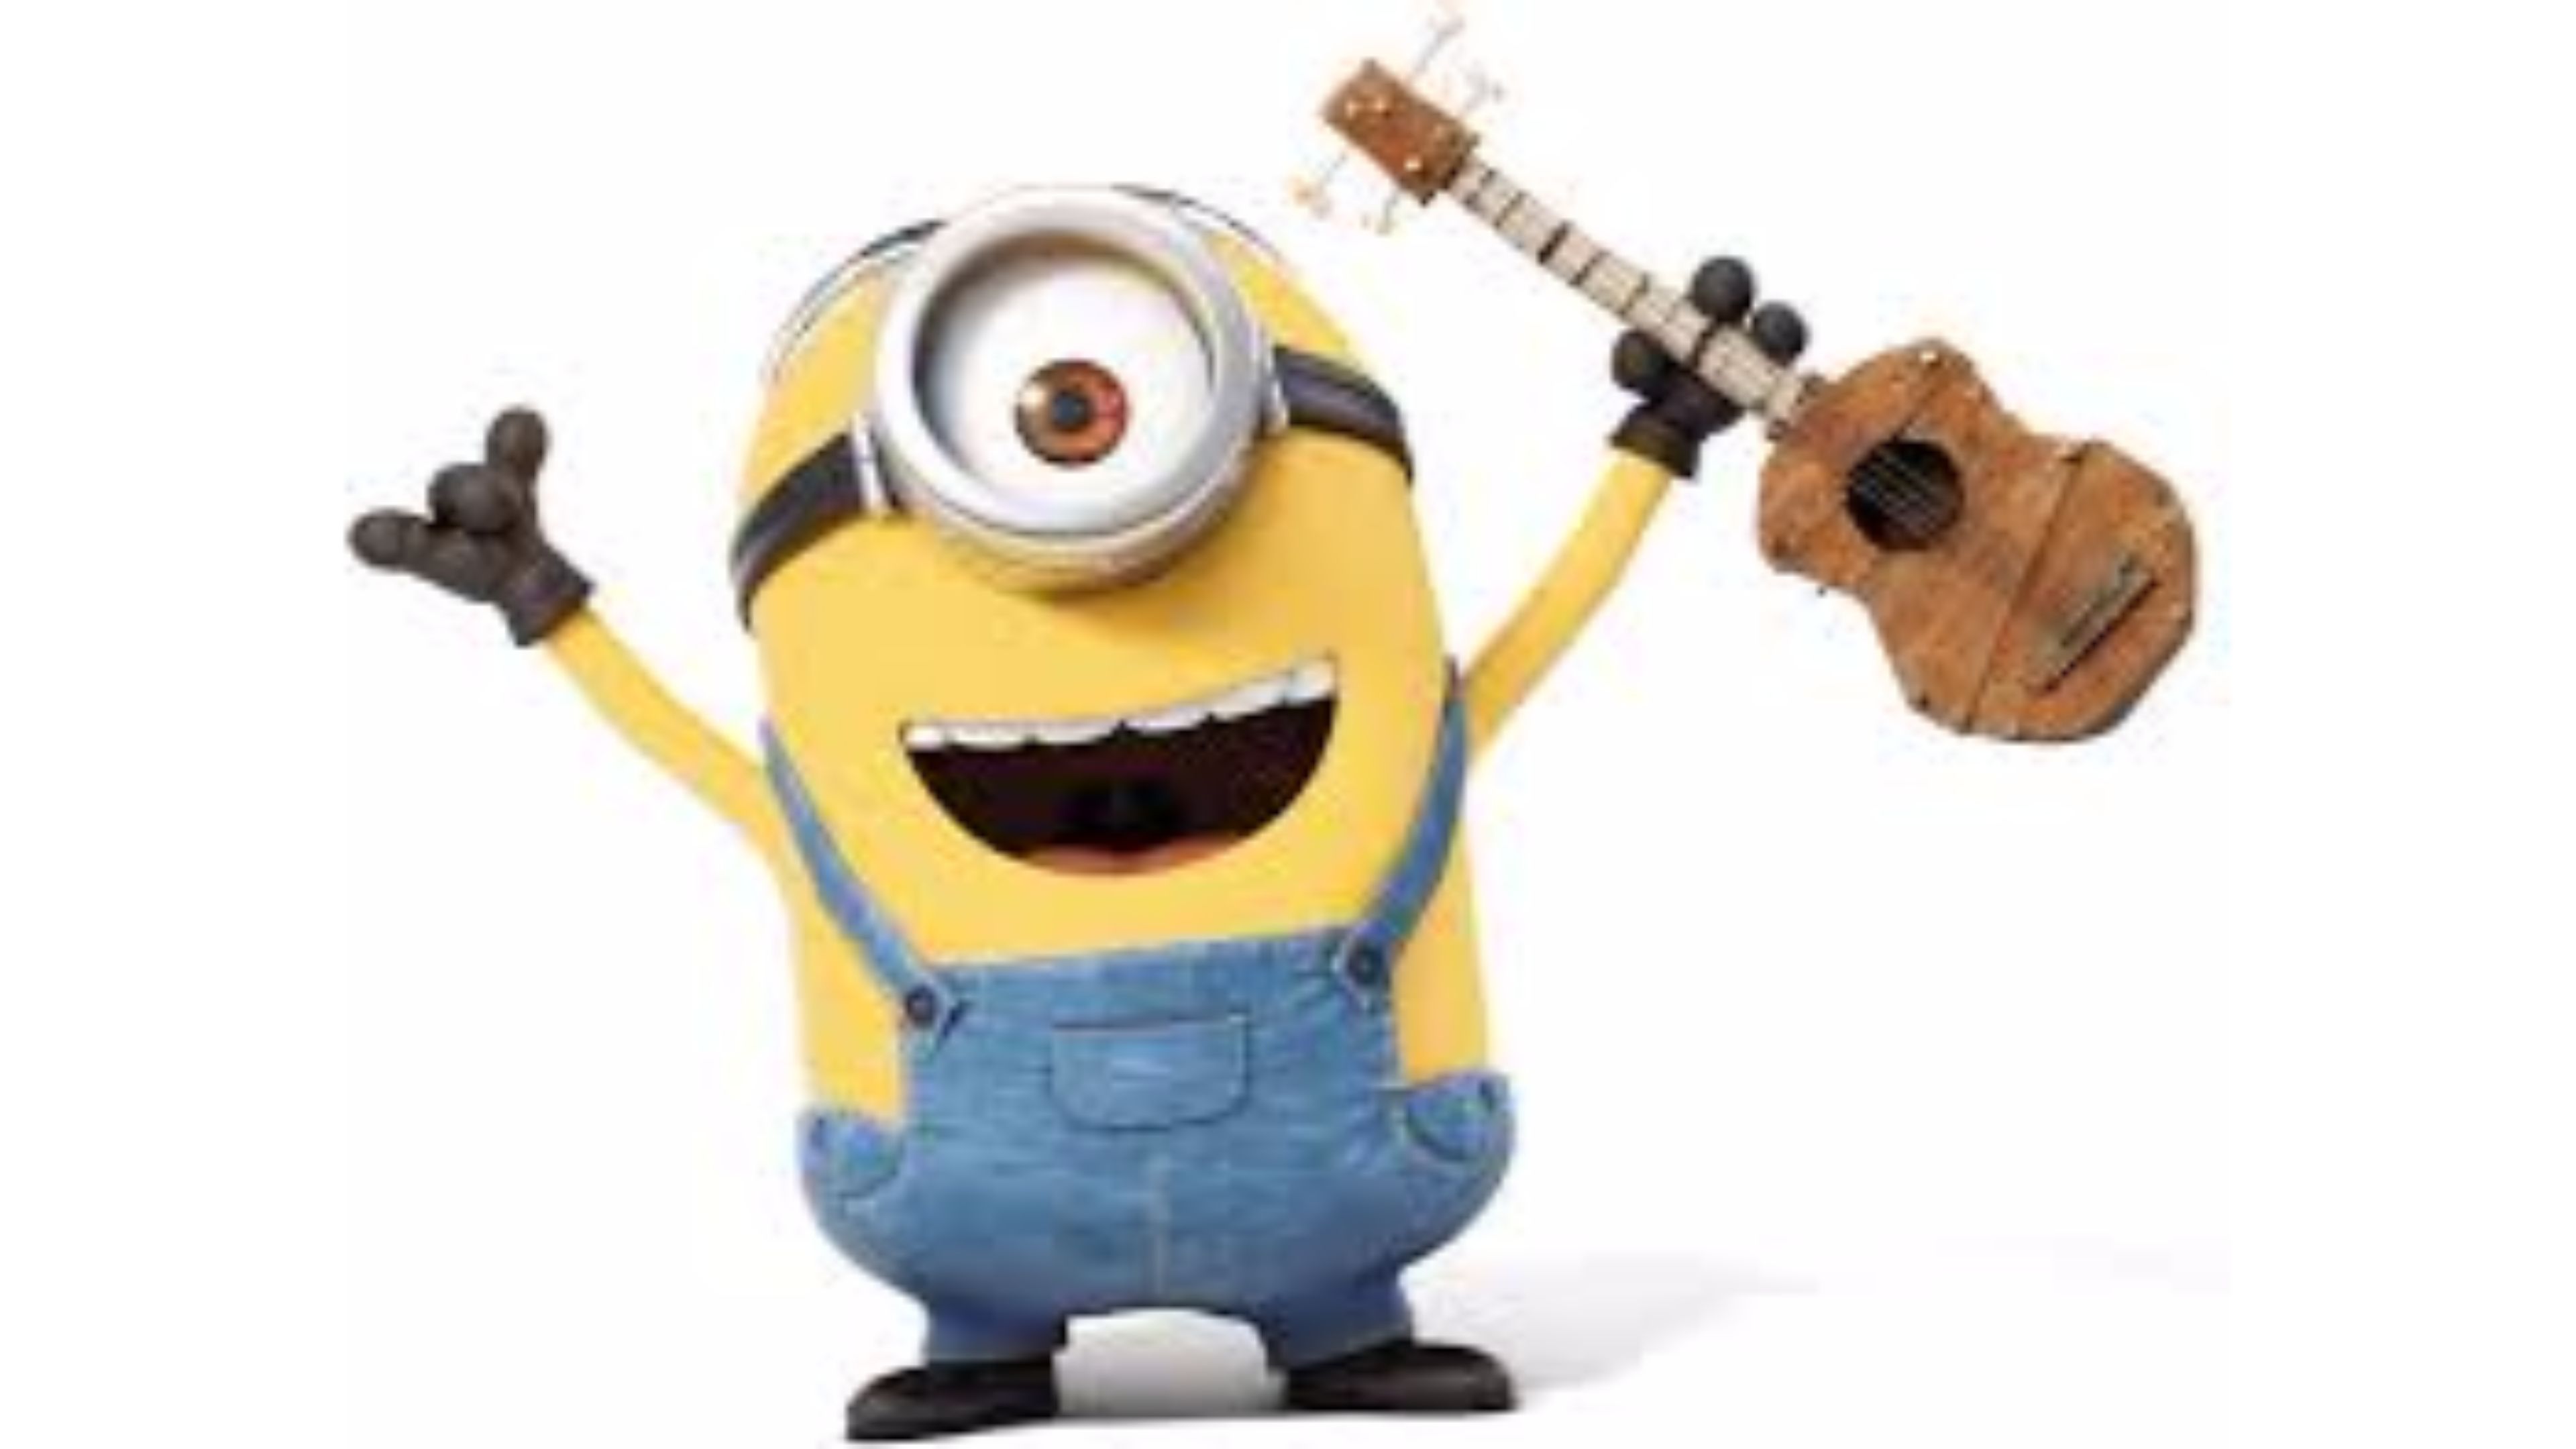  minions  wallpapers  photos and desktop backgrounds  up to 